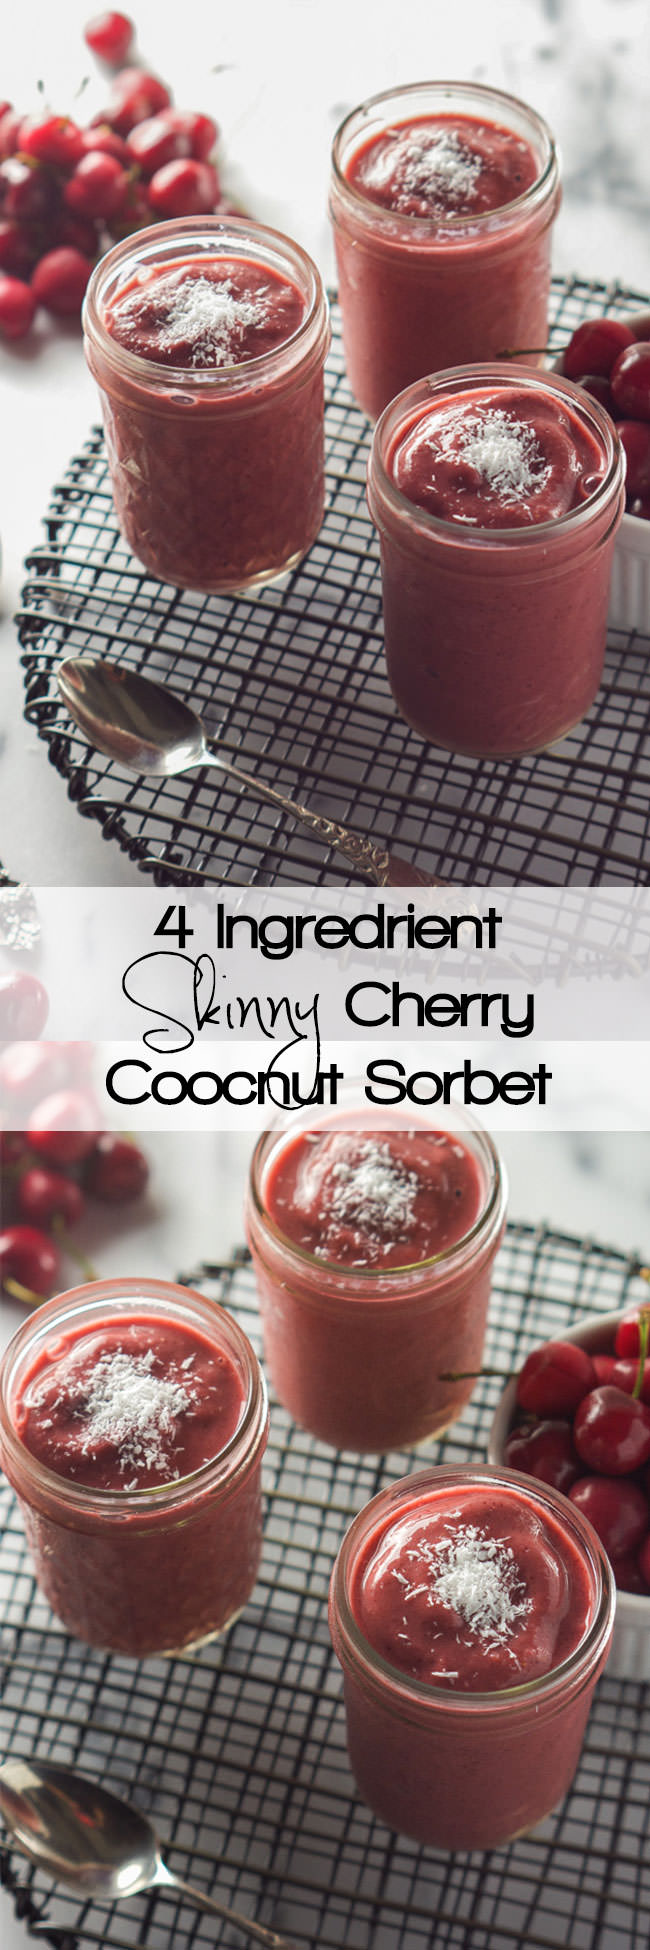 A warm weather dessert staple is only minutes away! Skinny Cherry Coconut Sorbet only has 4 healthy, natural ingredients and is full of fruity flavor!